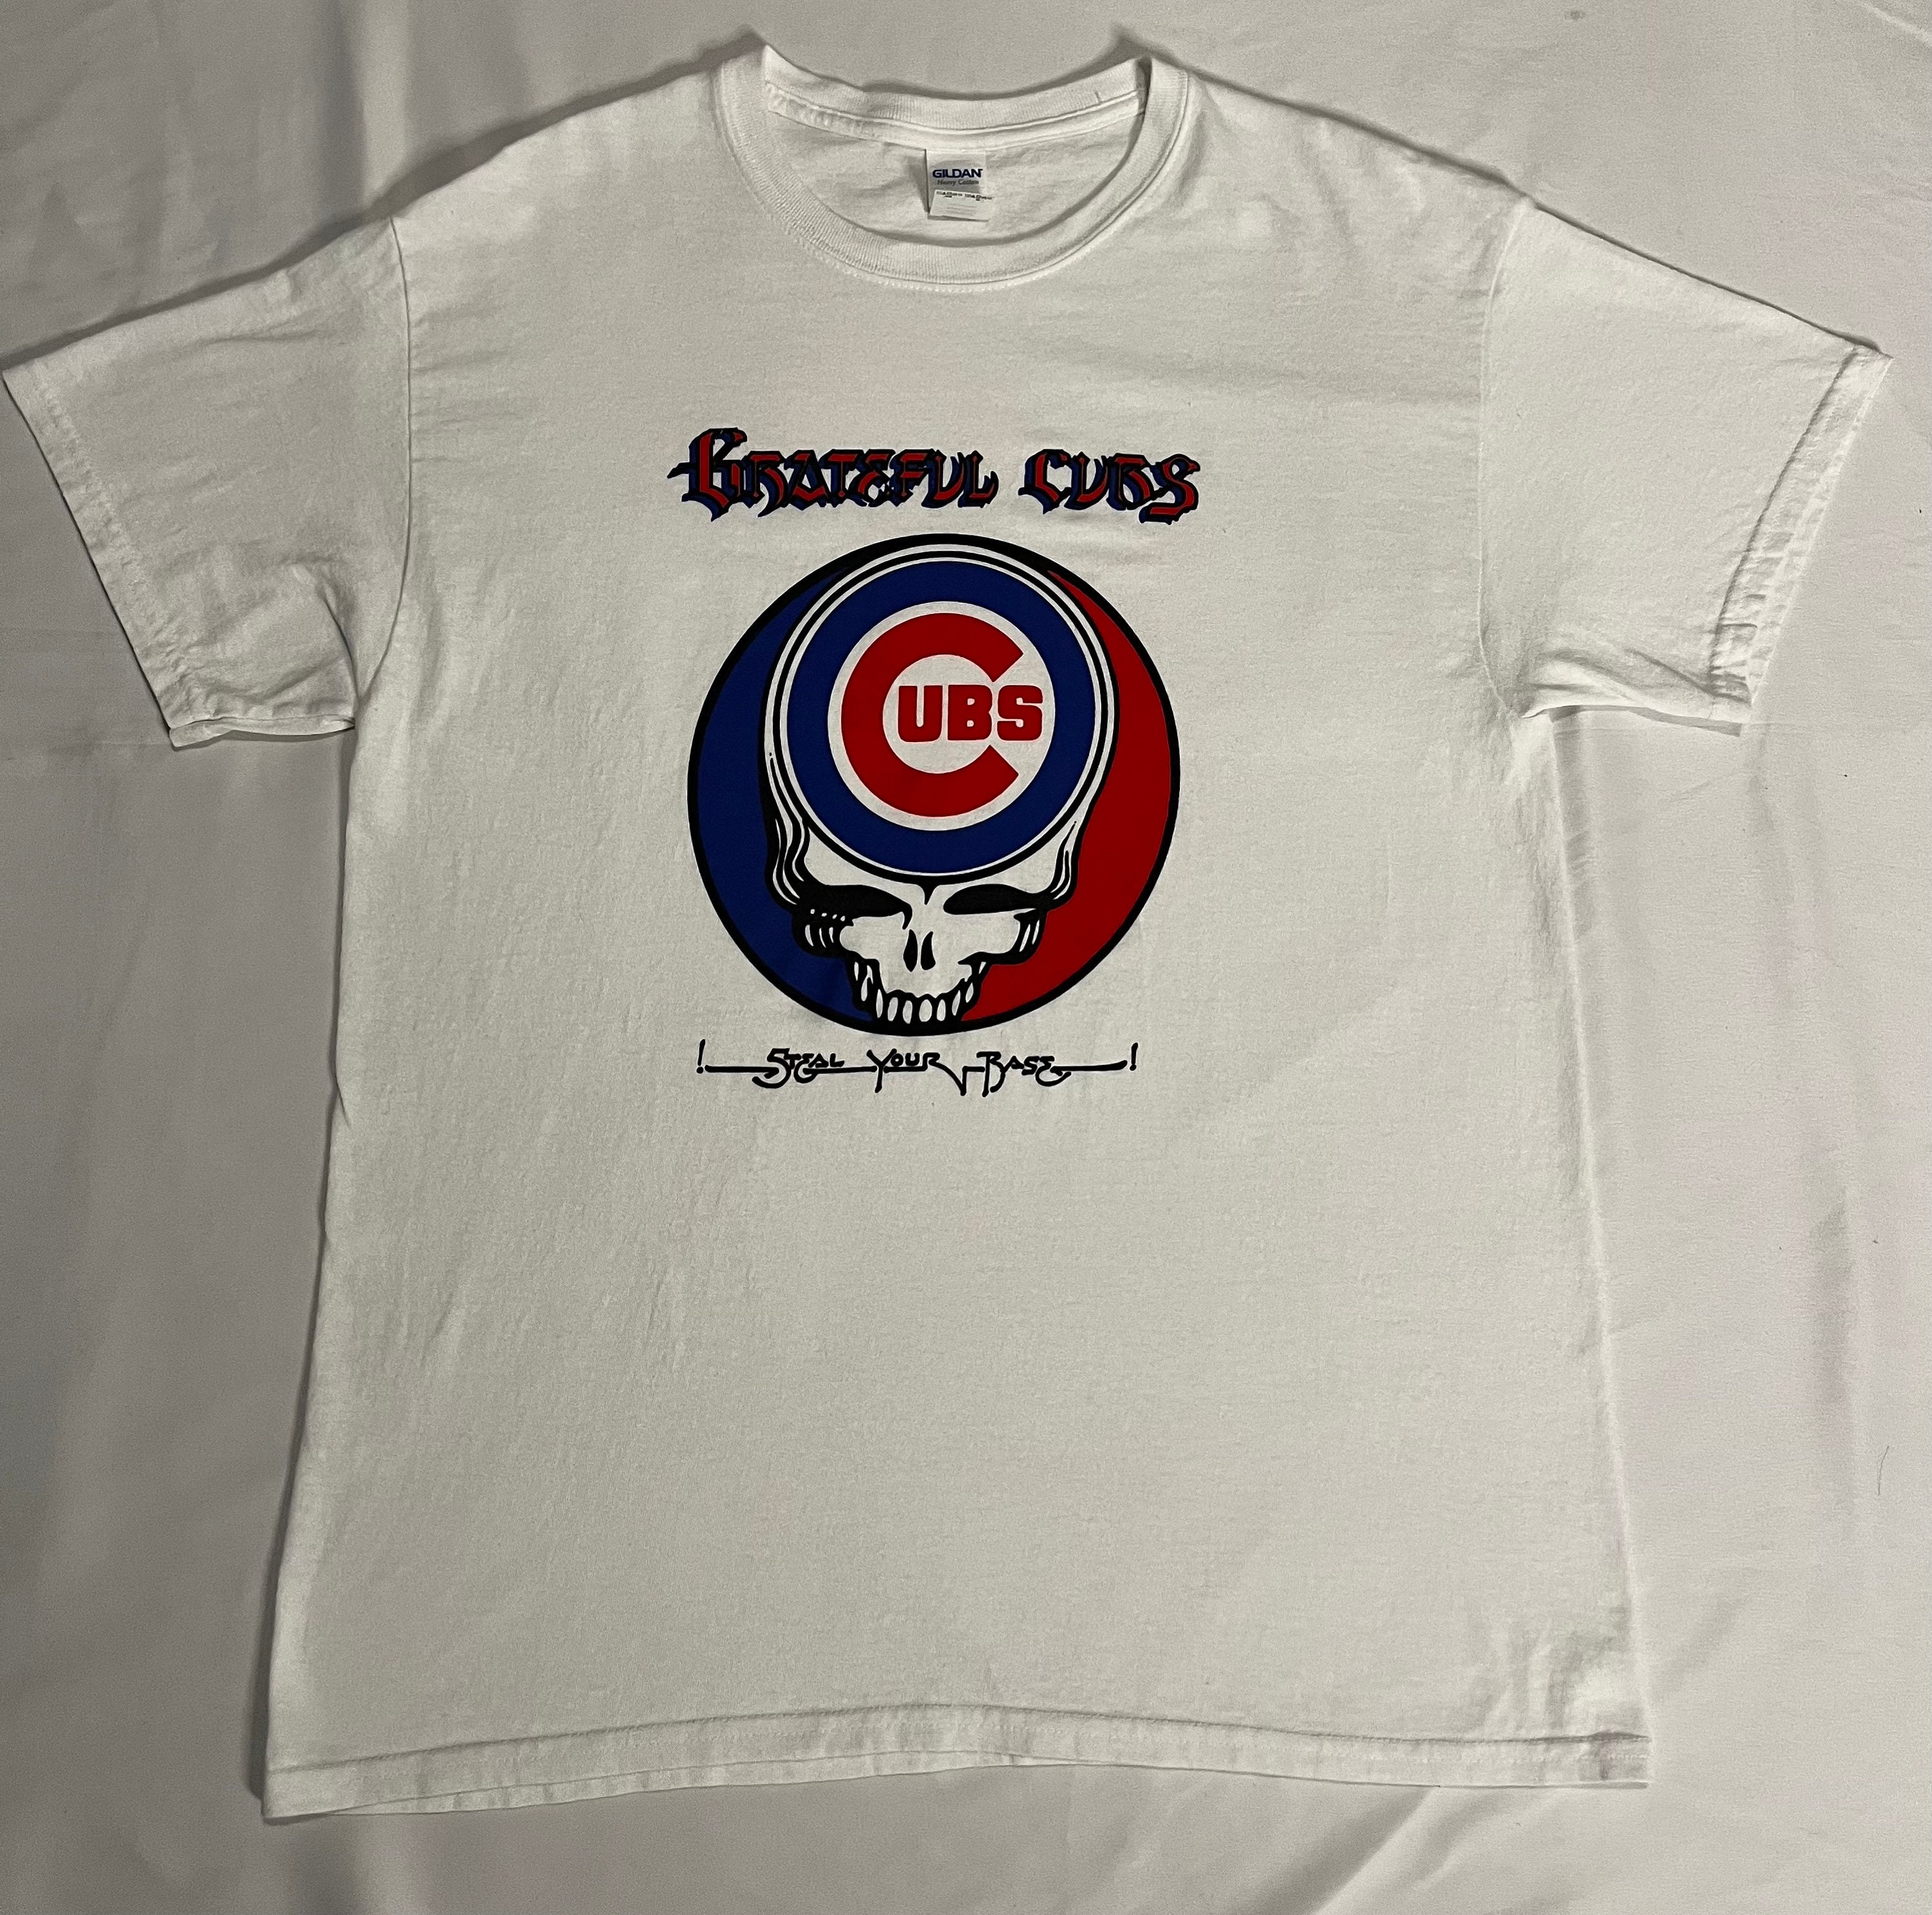 Chicago Cubs Steal Your Base Tie-Dye T-Shirt